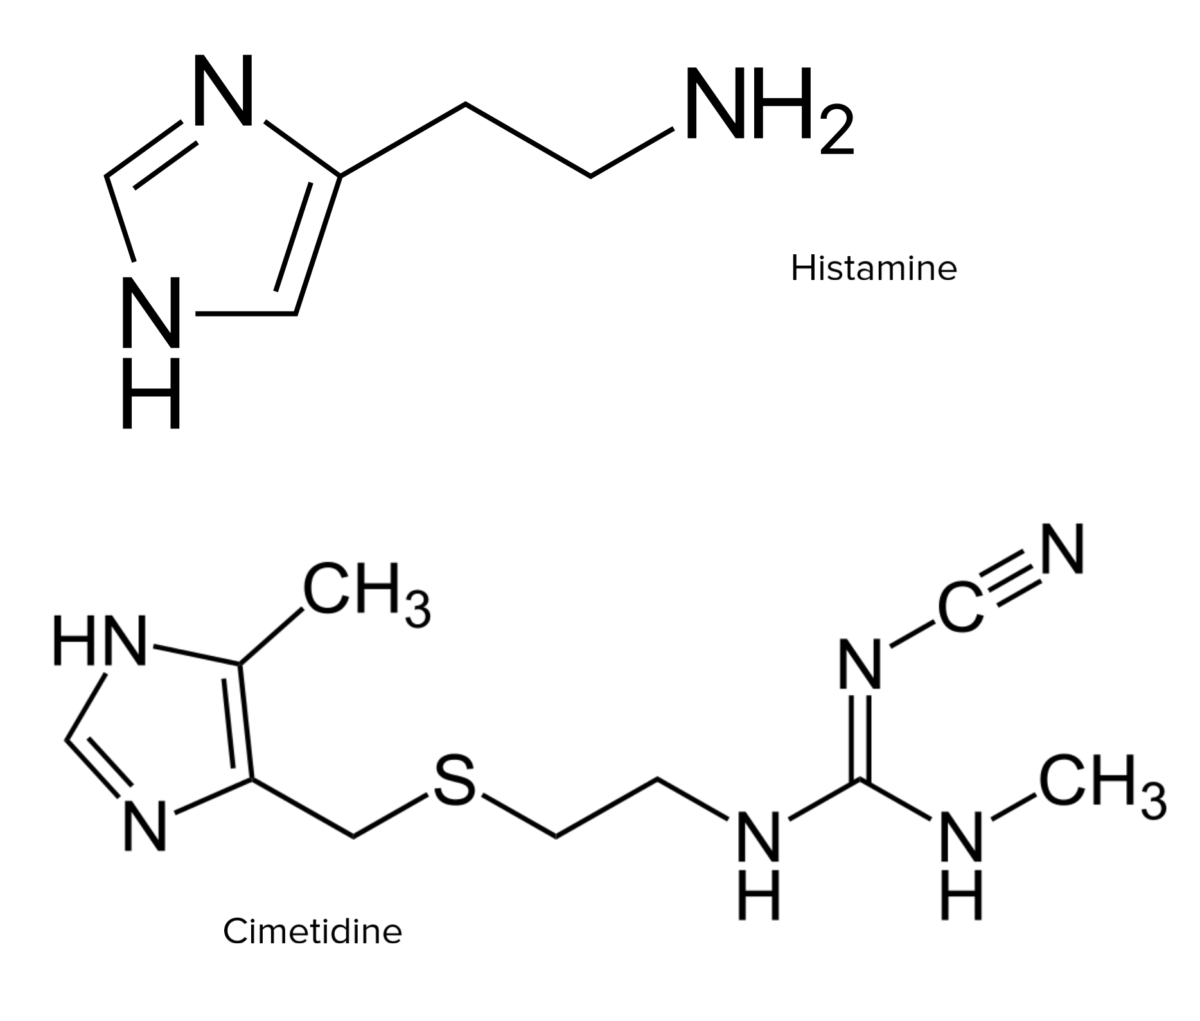 Chemical structures of histamine and cimetidine